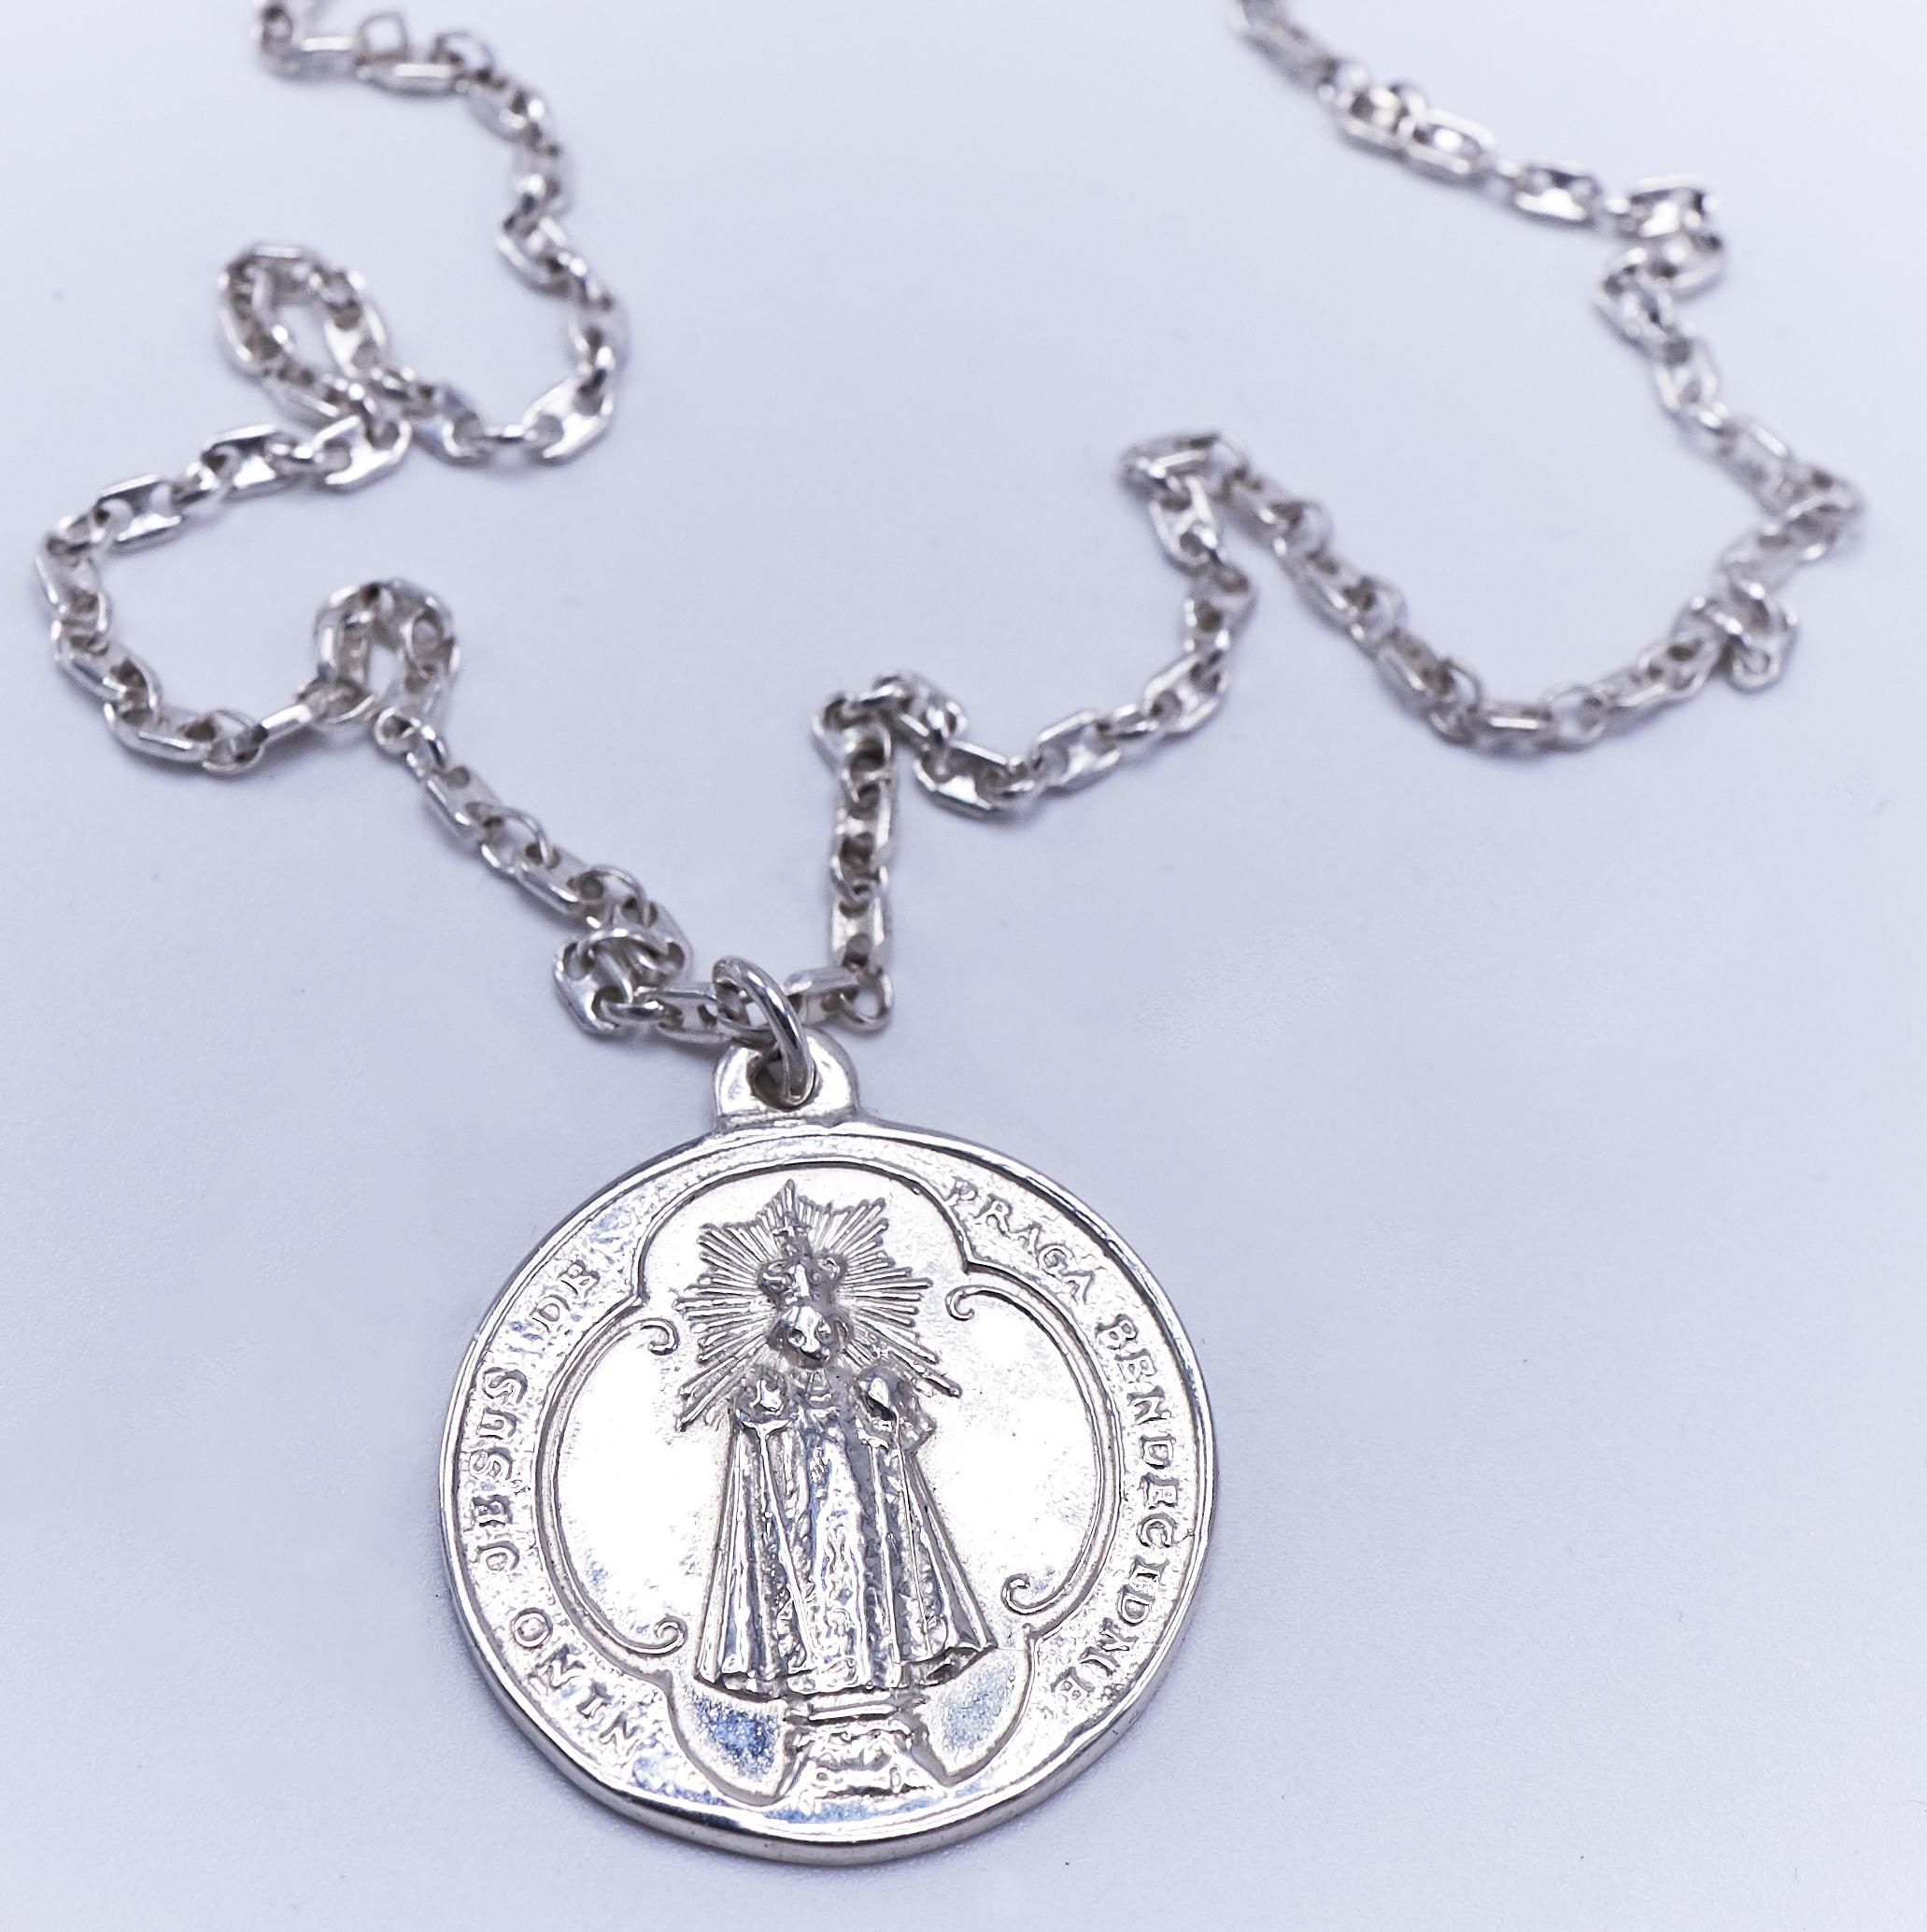 Contemporary Iolite Medal Chain Necklace Miraculous Virgin Mary Silver J Dauphin For Sale